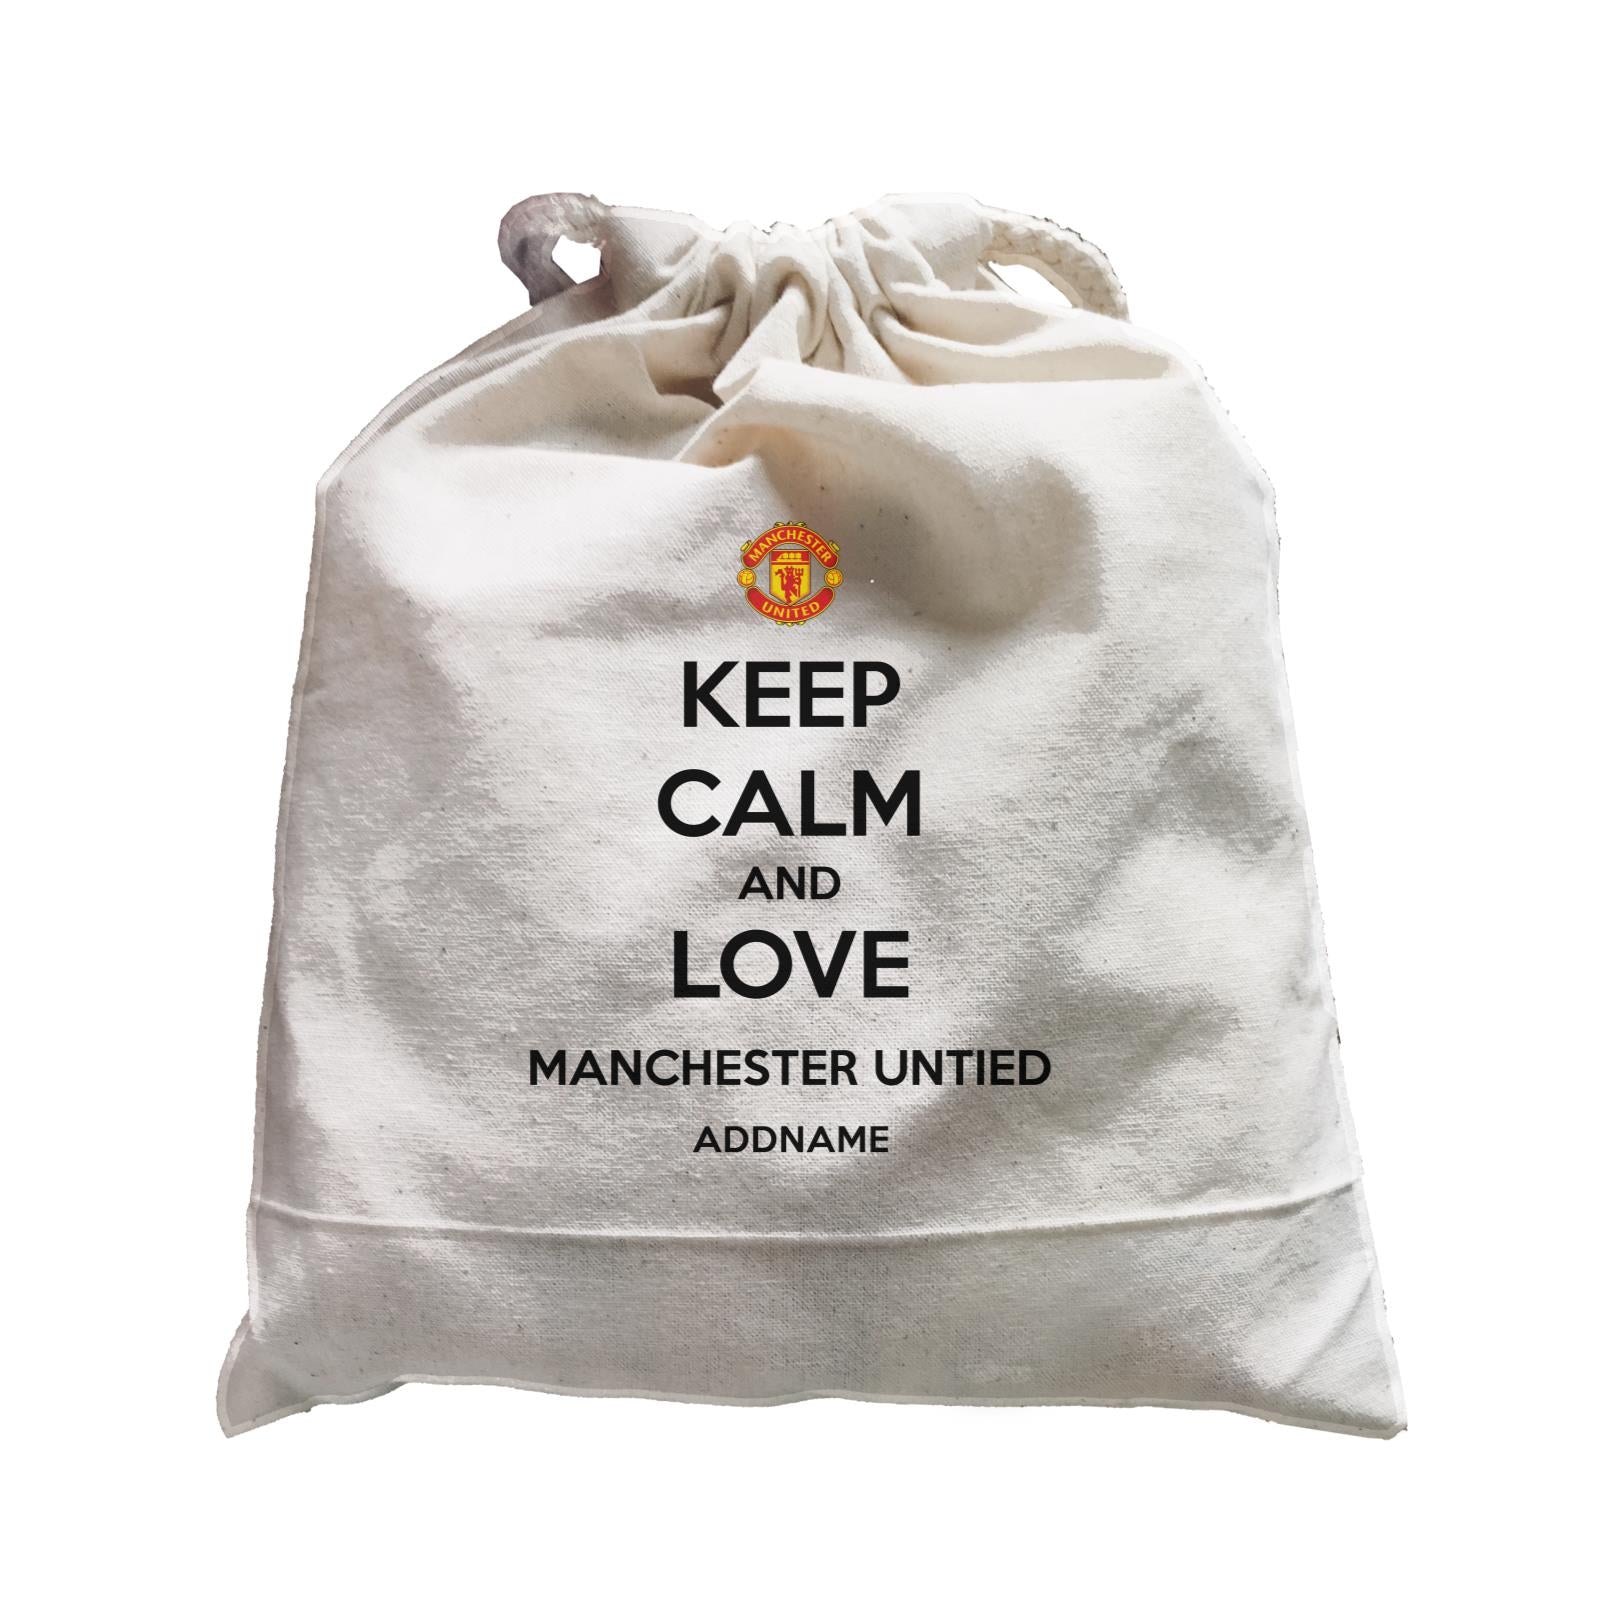 Manchester United Football Keep Calm And Love Series Addname Satchel